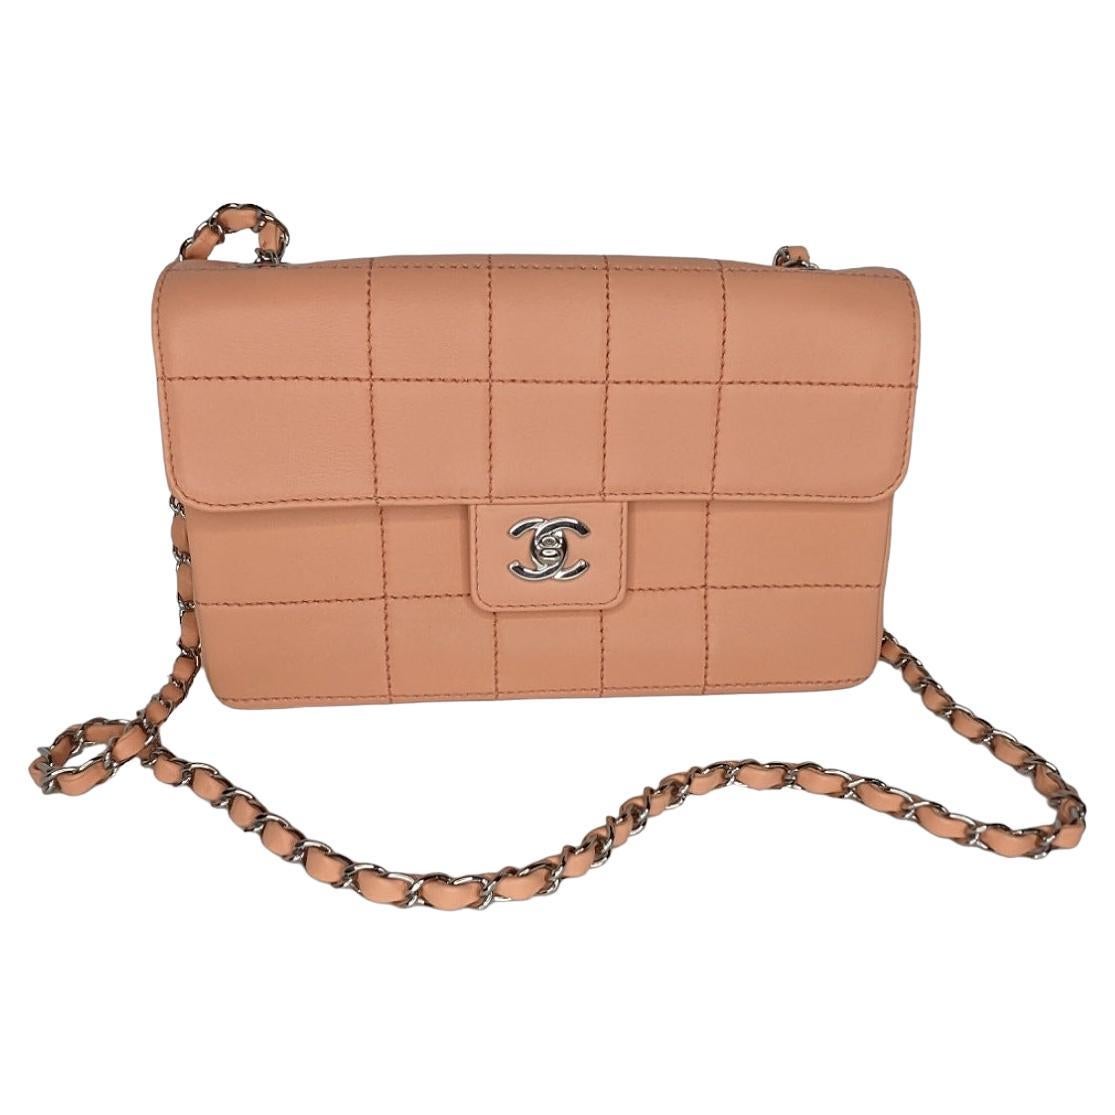 Chanel Vintage Peach Square Quilted Medium Flap Bag For Sale